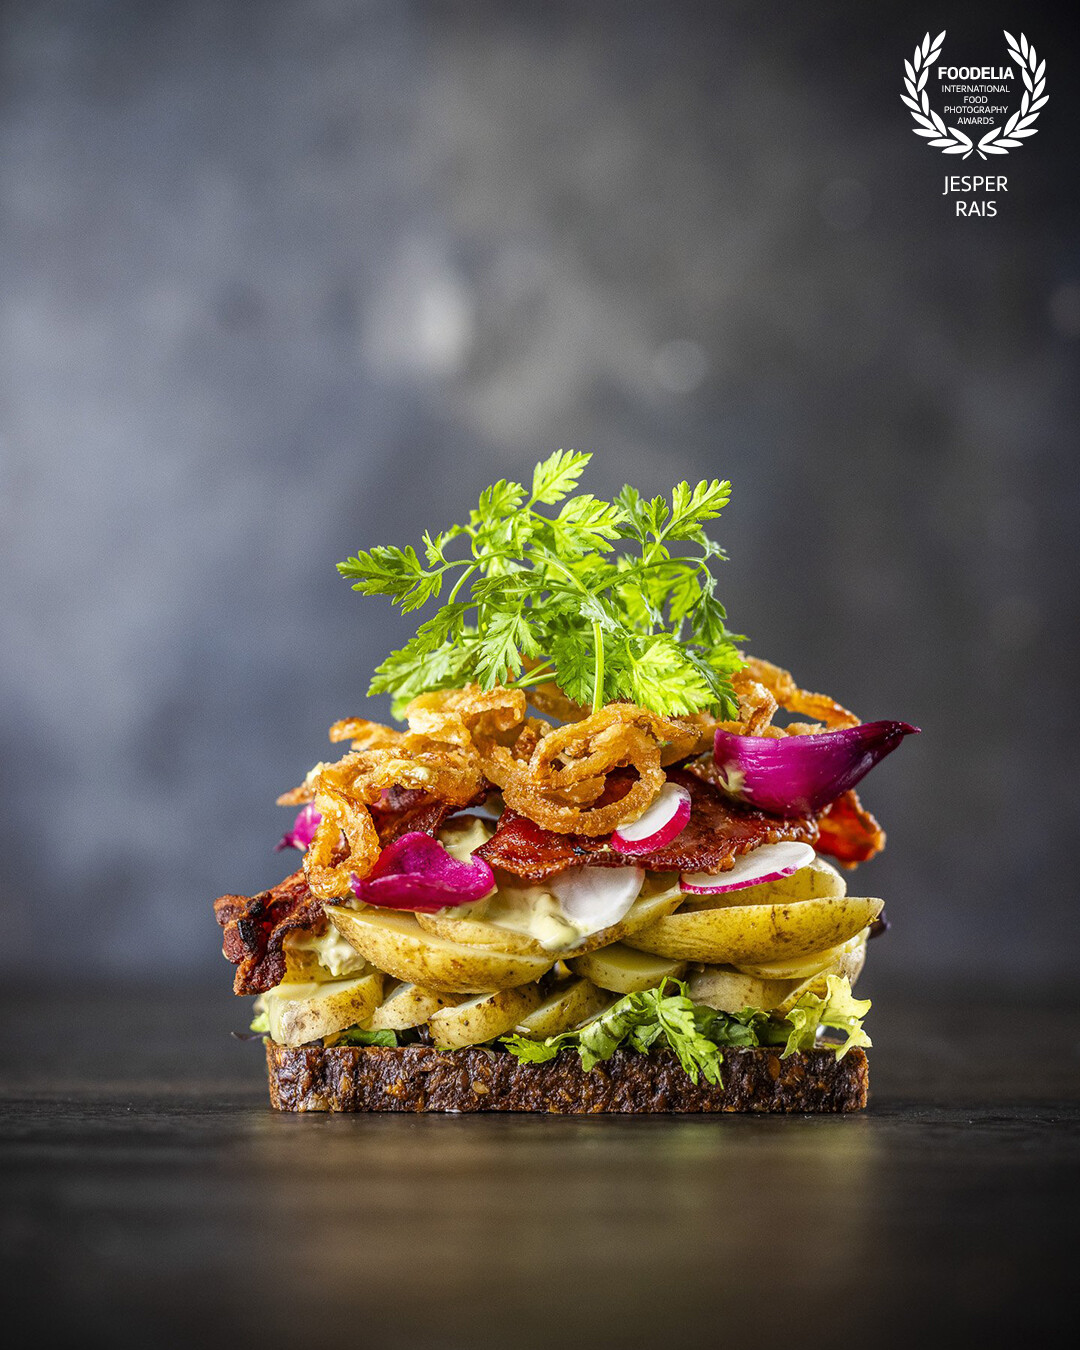 The famous danish "smørrebrød" - an openfaced sandwich. Picture is the bookcover for at new book "101 pierces of smørrebrød".